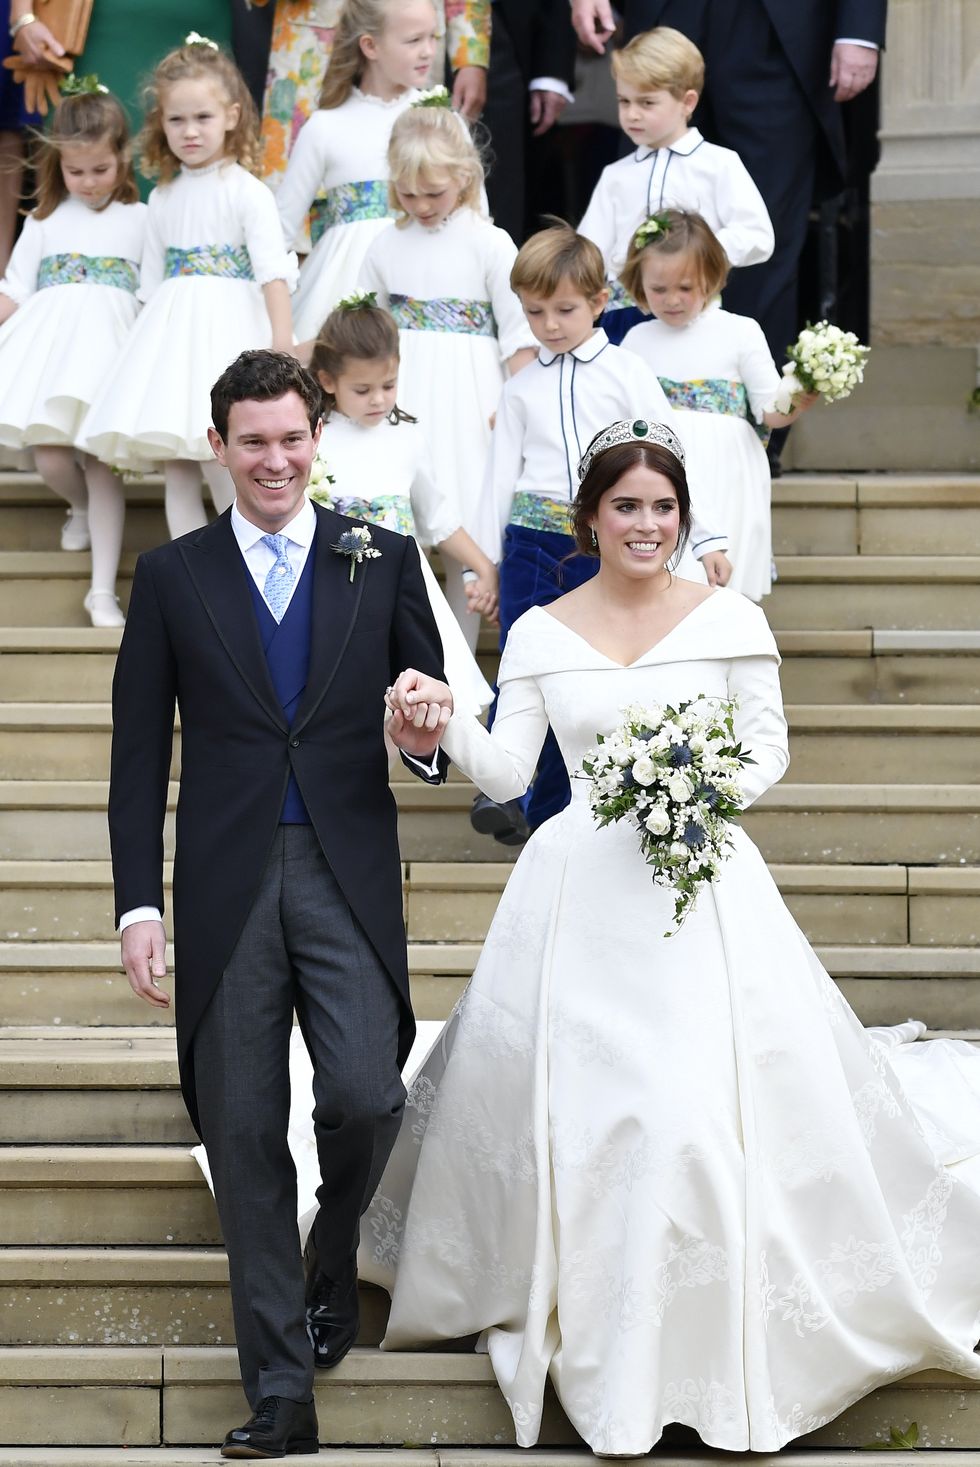 The 35 Most Amazing Celebrity Wedding Dresses Of All Time